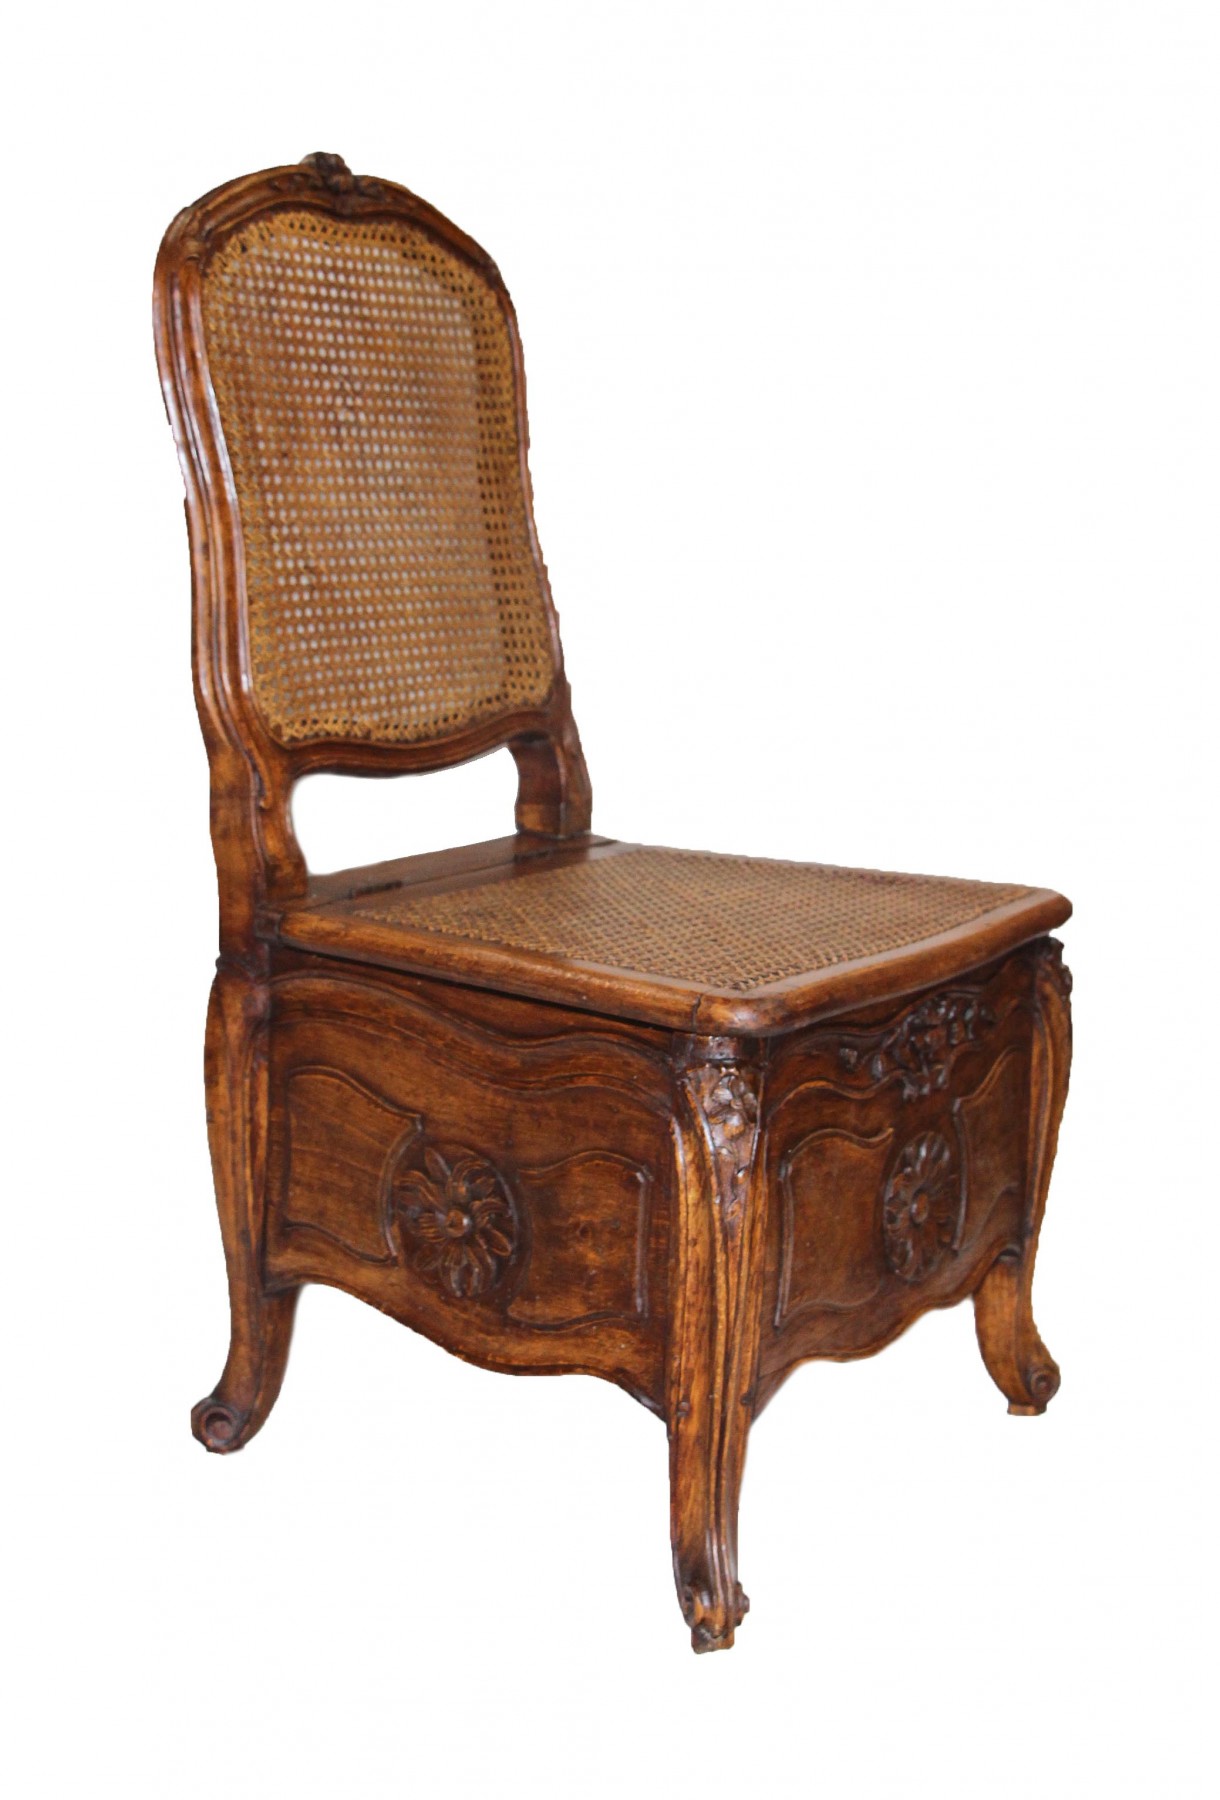 Commode Chair Stamped Etienne Meunier Ref 78449